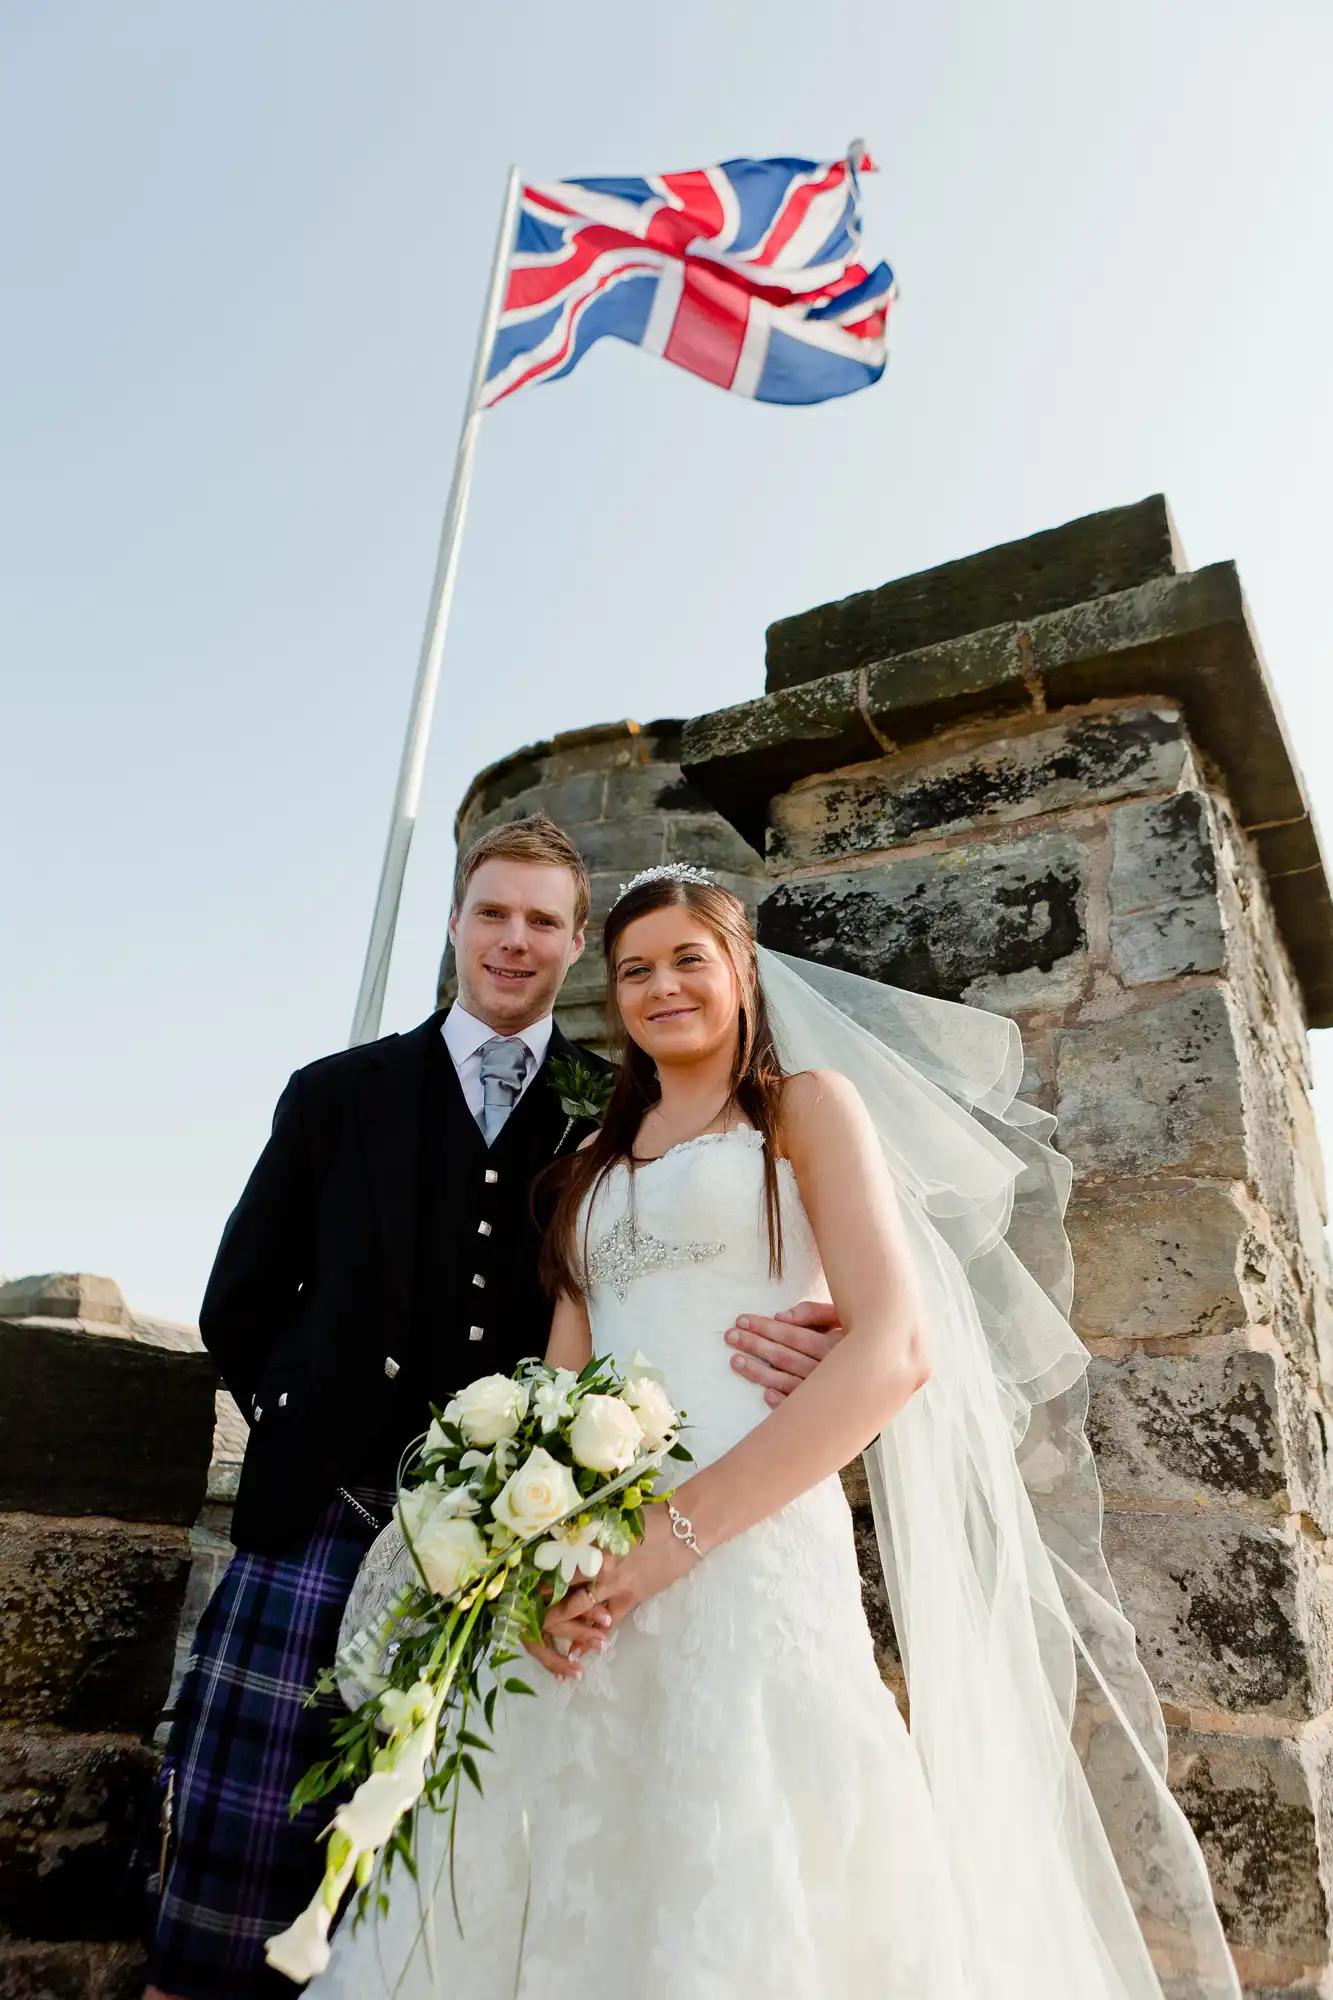 A newlywed couple posing under a british flag at a historic castle, with the groom in tartan kilt and bride holding a bouquet.